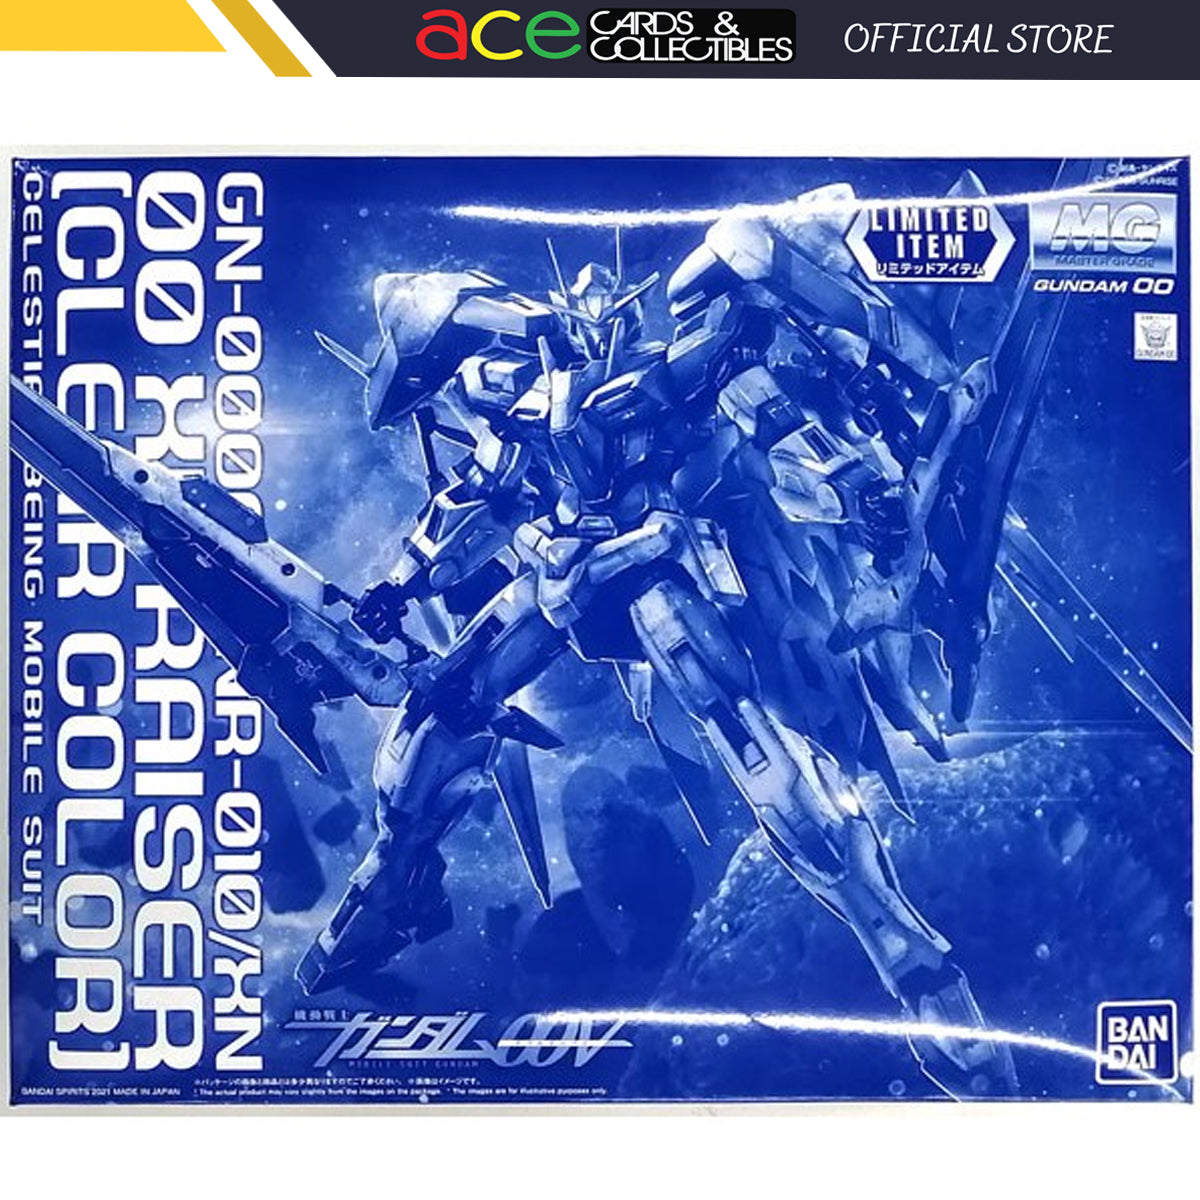 Newest Products Tagged MG Gundam - Ace Cards & Collectibles